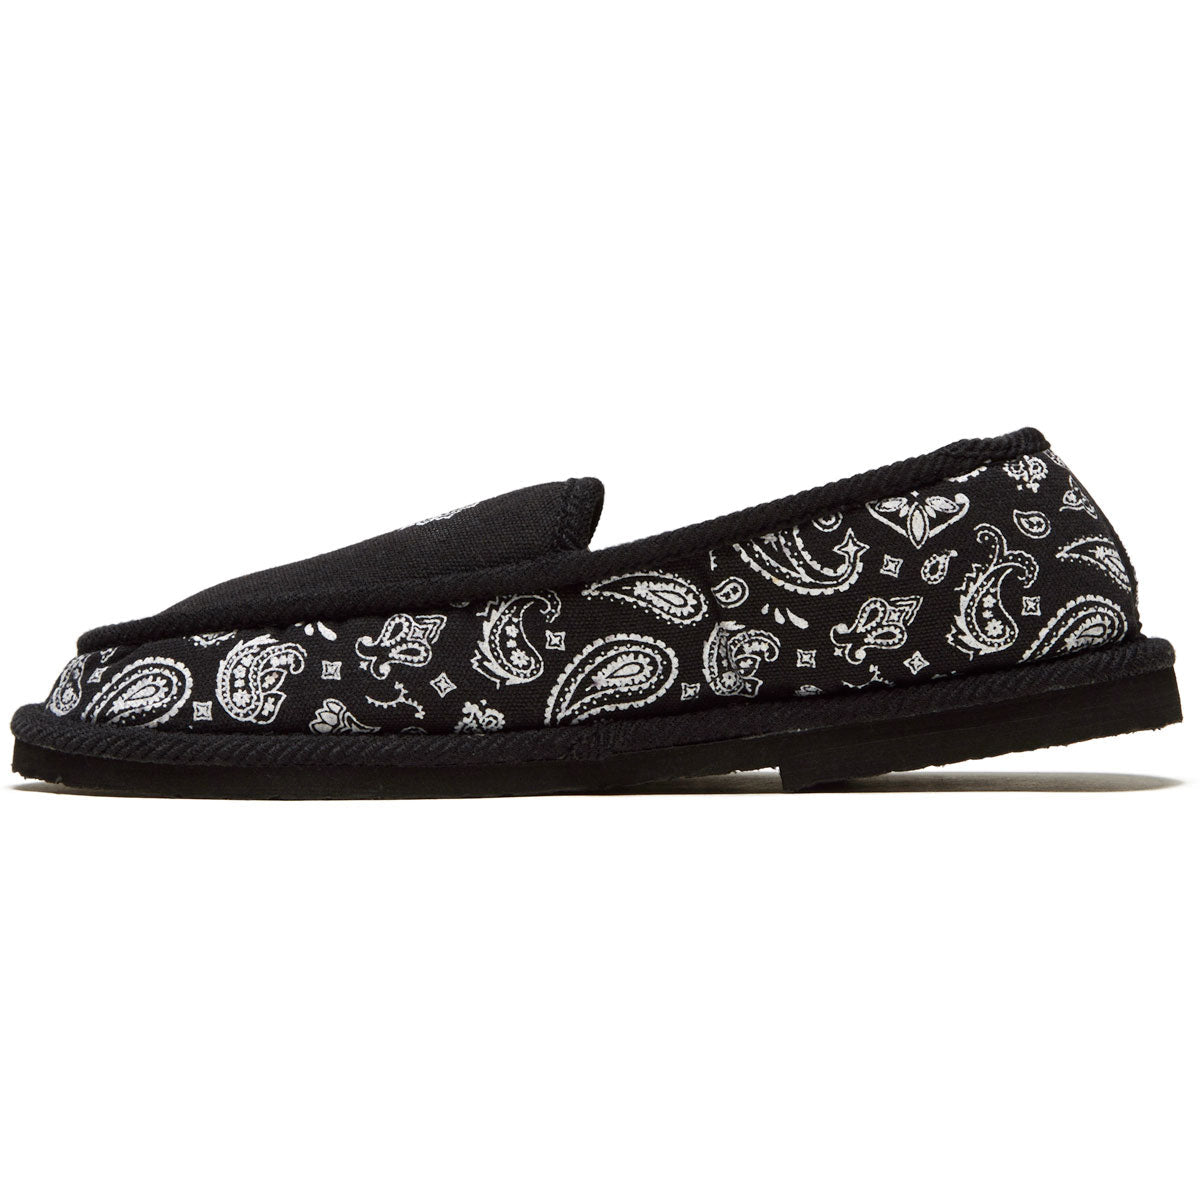 DVS Francisco Slippers - Black/White Printed Canvas image 2